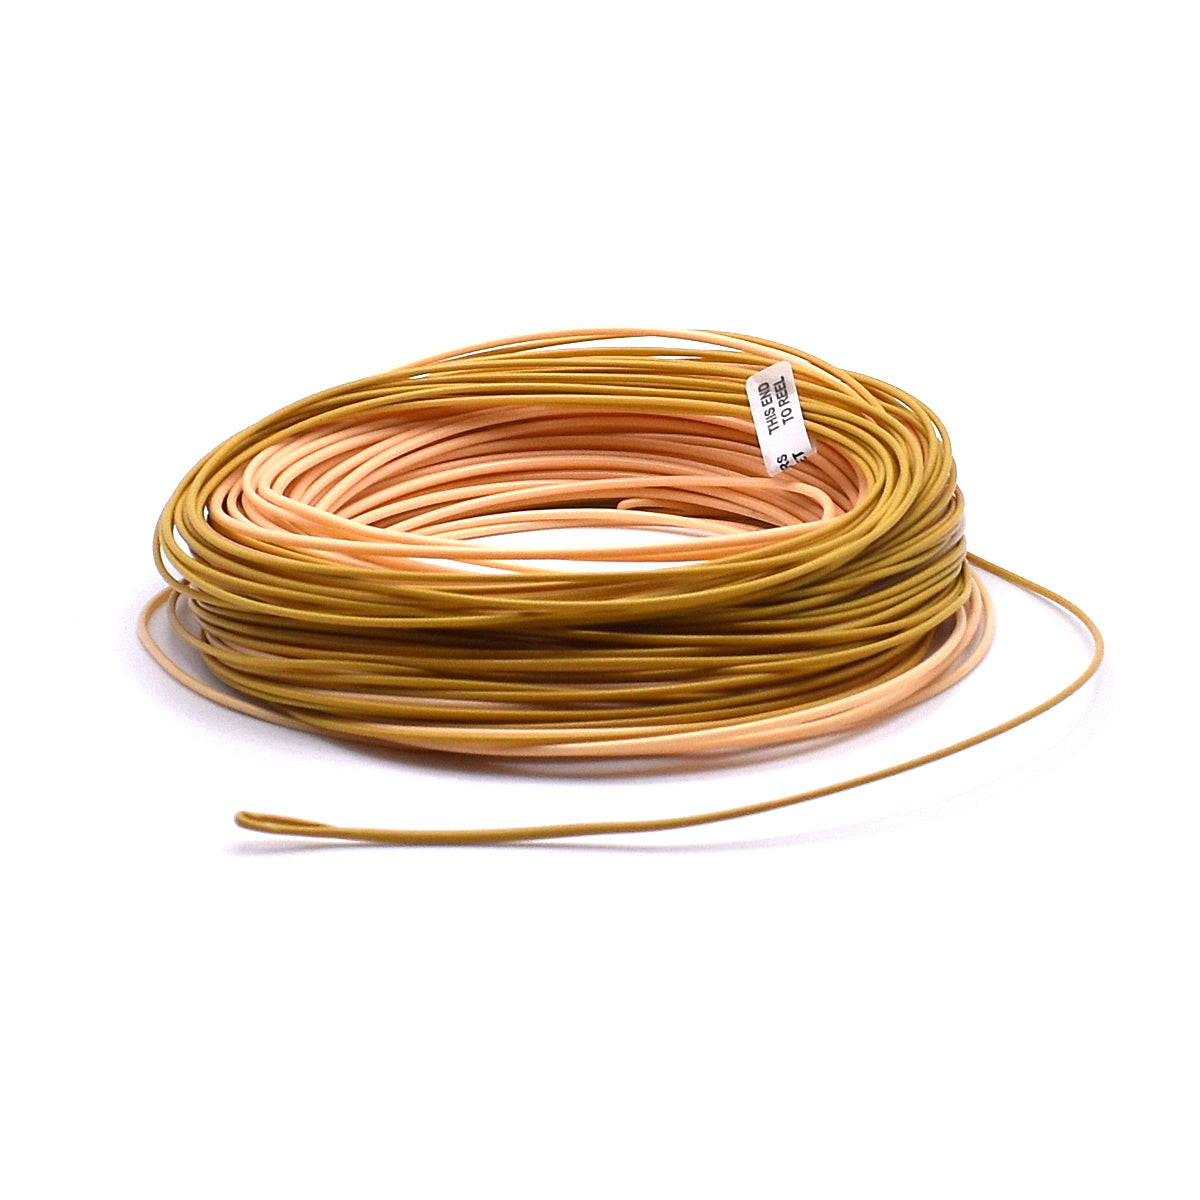 Scientific Anglers Absolute 1x7 Nickel Titanium Wire, Buy SA NiTi Fishing  Wire Material At The Fly Fishers